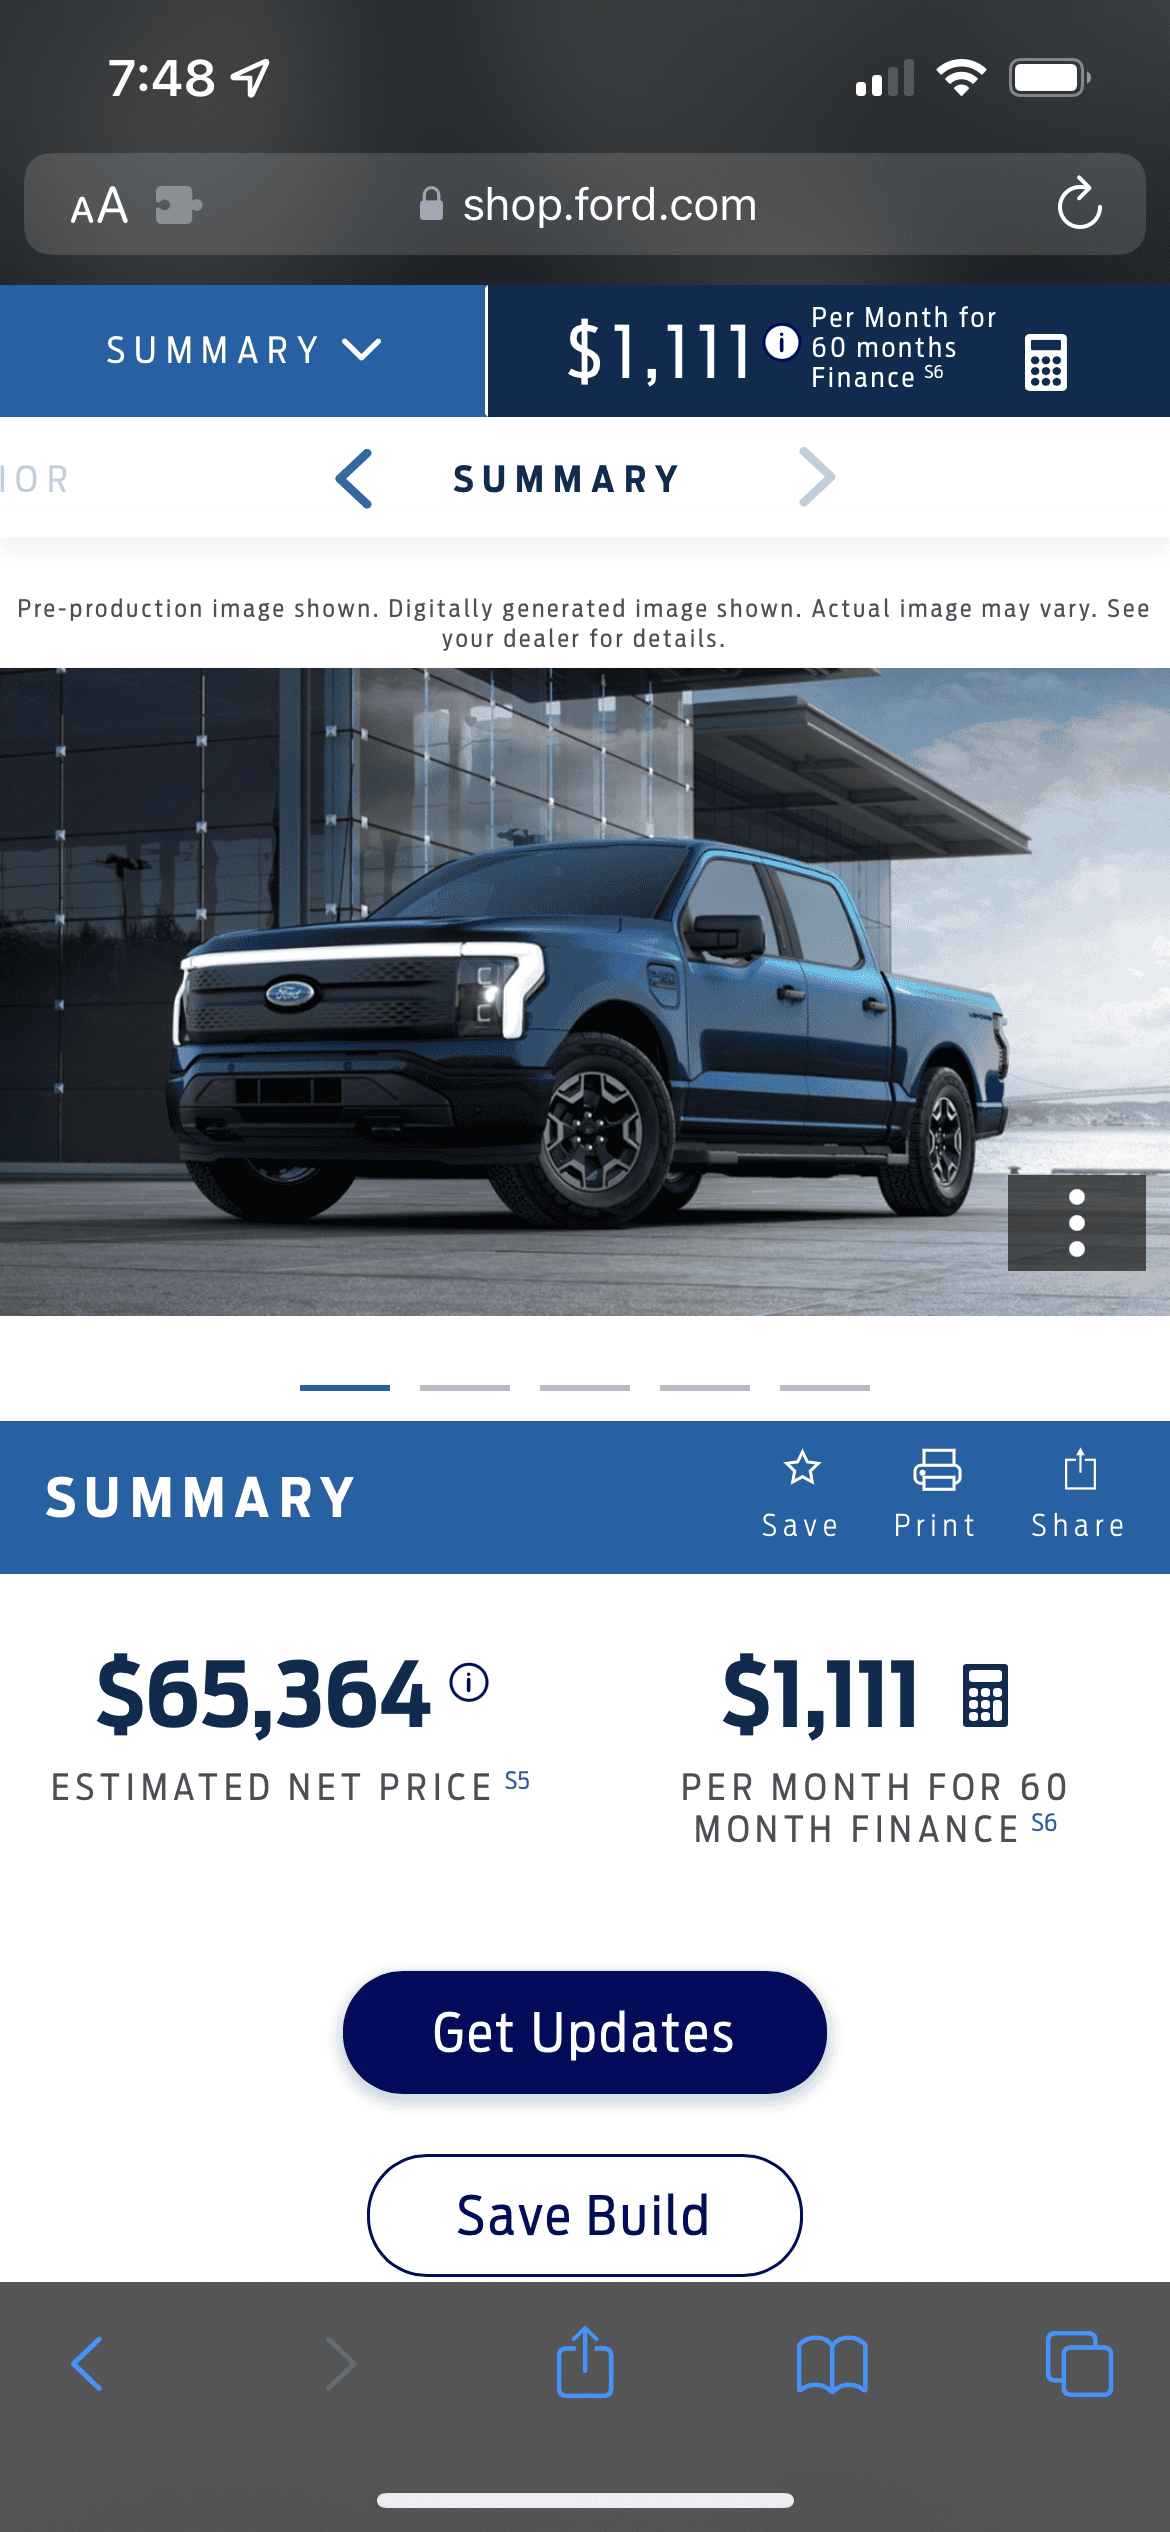 Ford F-150 Lightning 2023 Lightning Build and Price is Live .... $5000+ increase in price 17648881-EA96-41E2-AF92-08207515FEF1